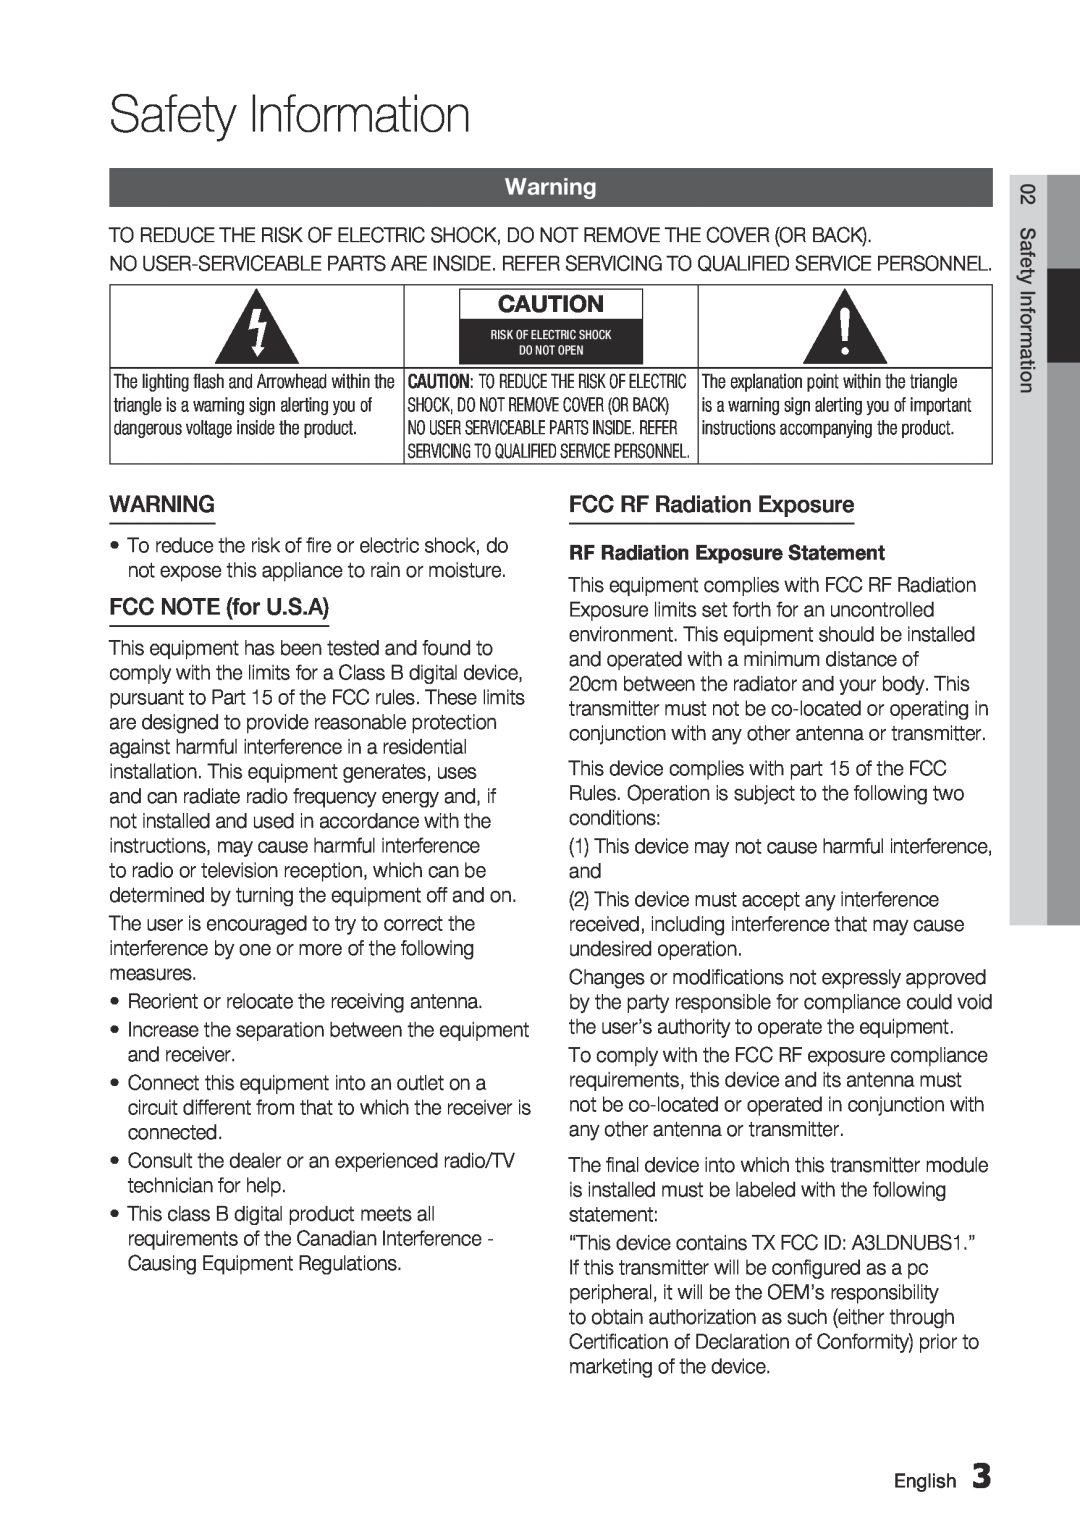 Samsung BD-C6500/XEE Safety Information, FCC NOTE for U.S.A, FCC RF Radiation Exposure, RF Radiation Exposure Statement 